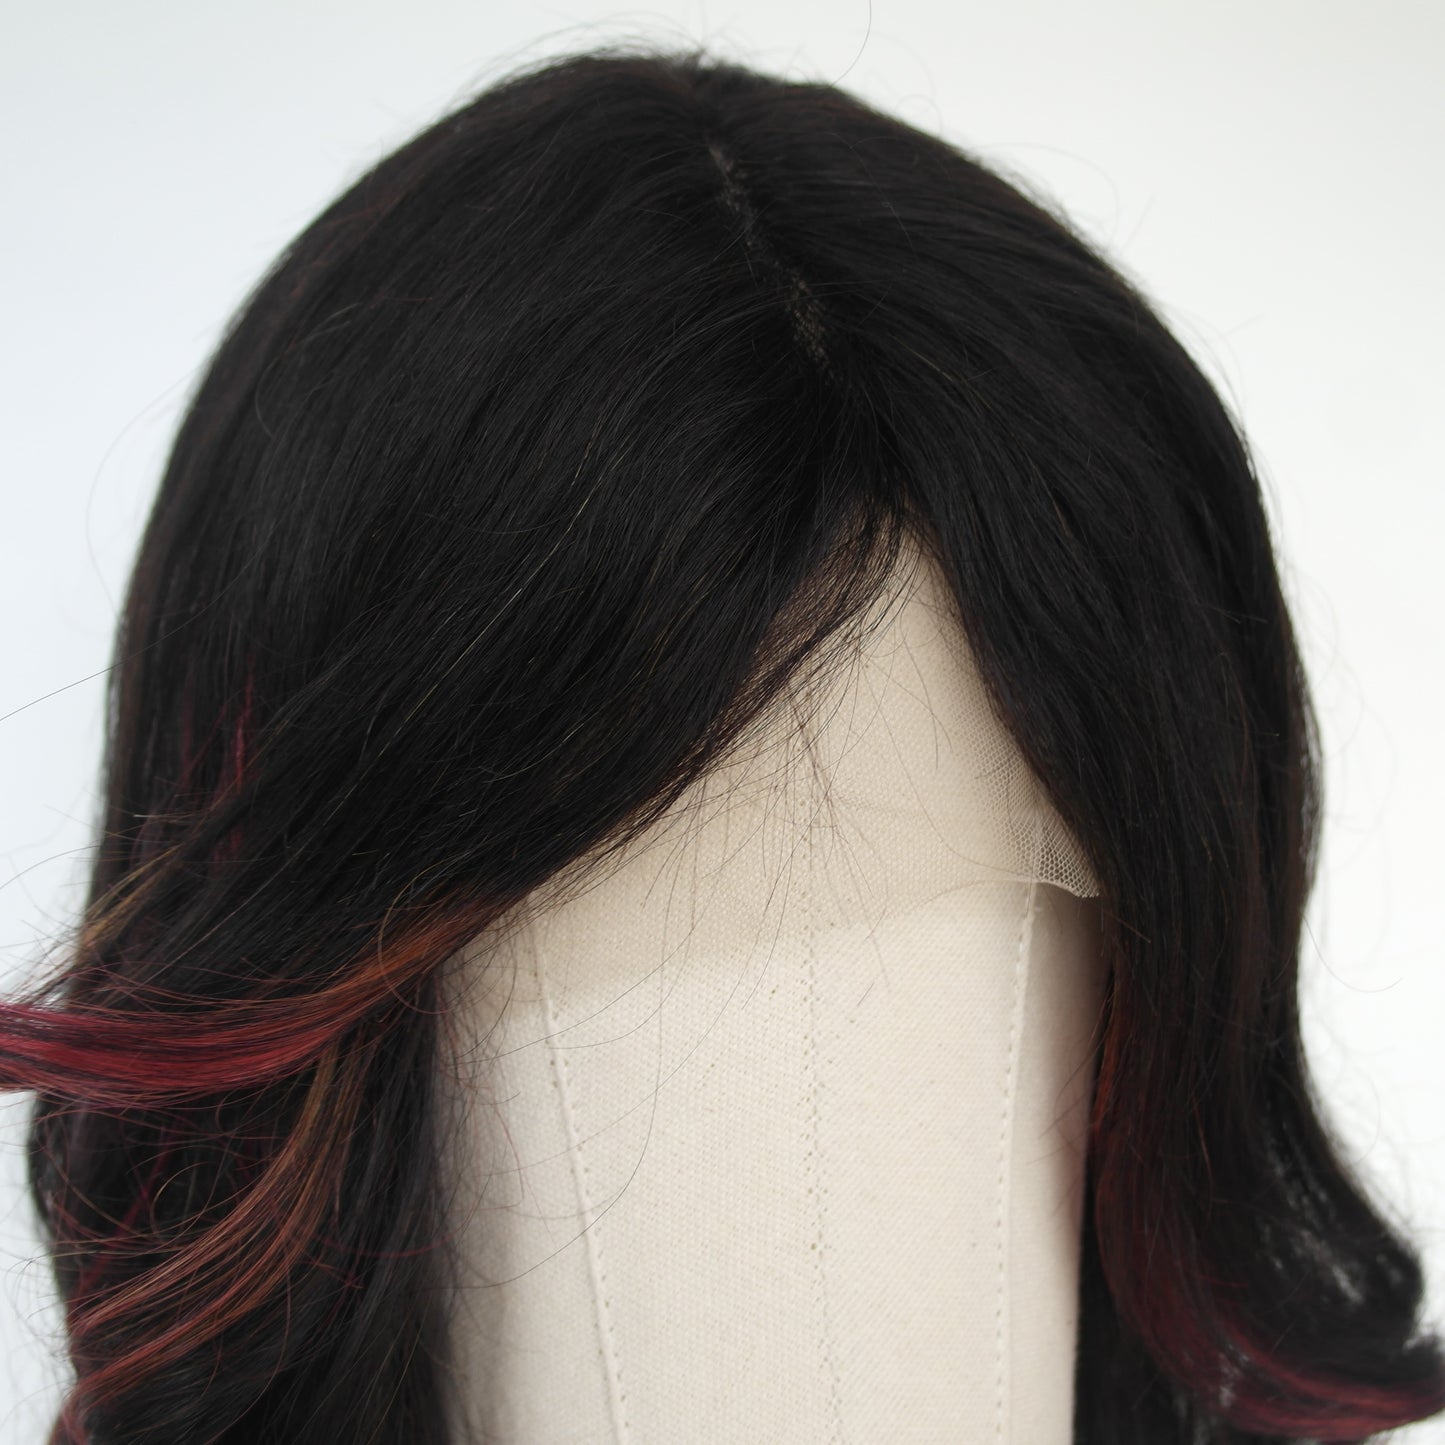 Licorice Allsorts [ Recycled ] Human Hair Wig